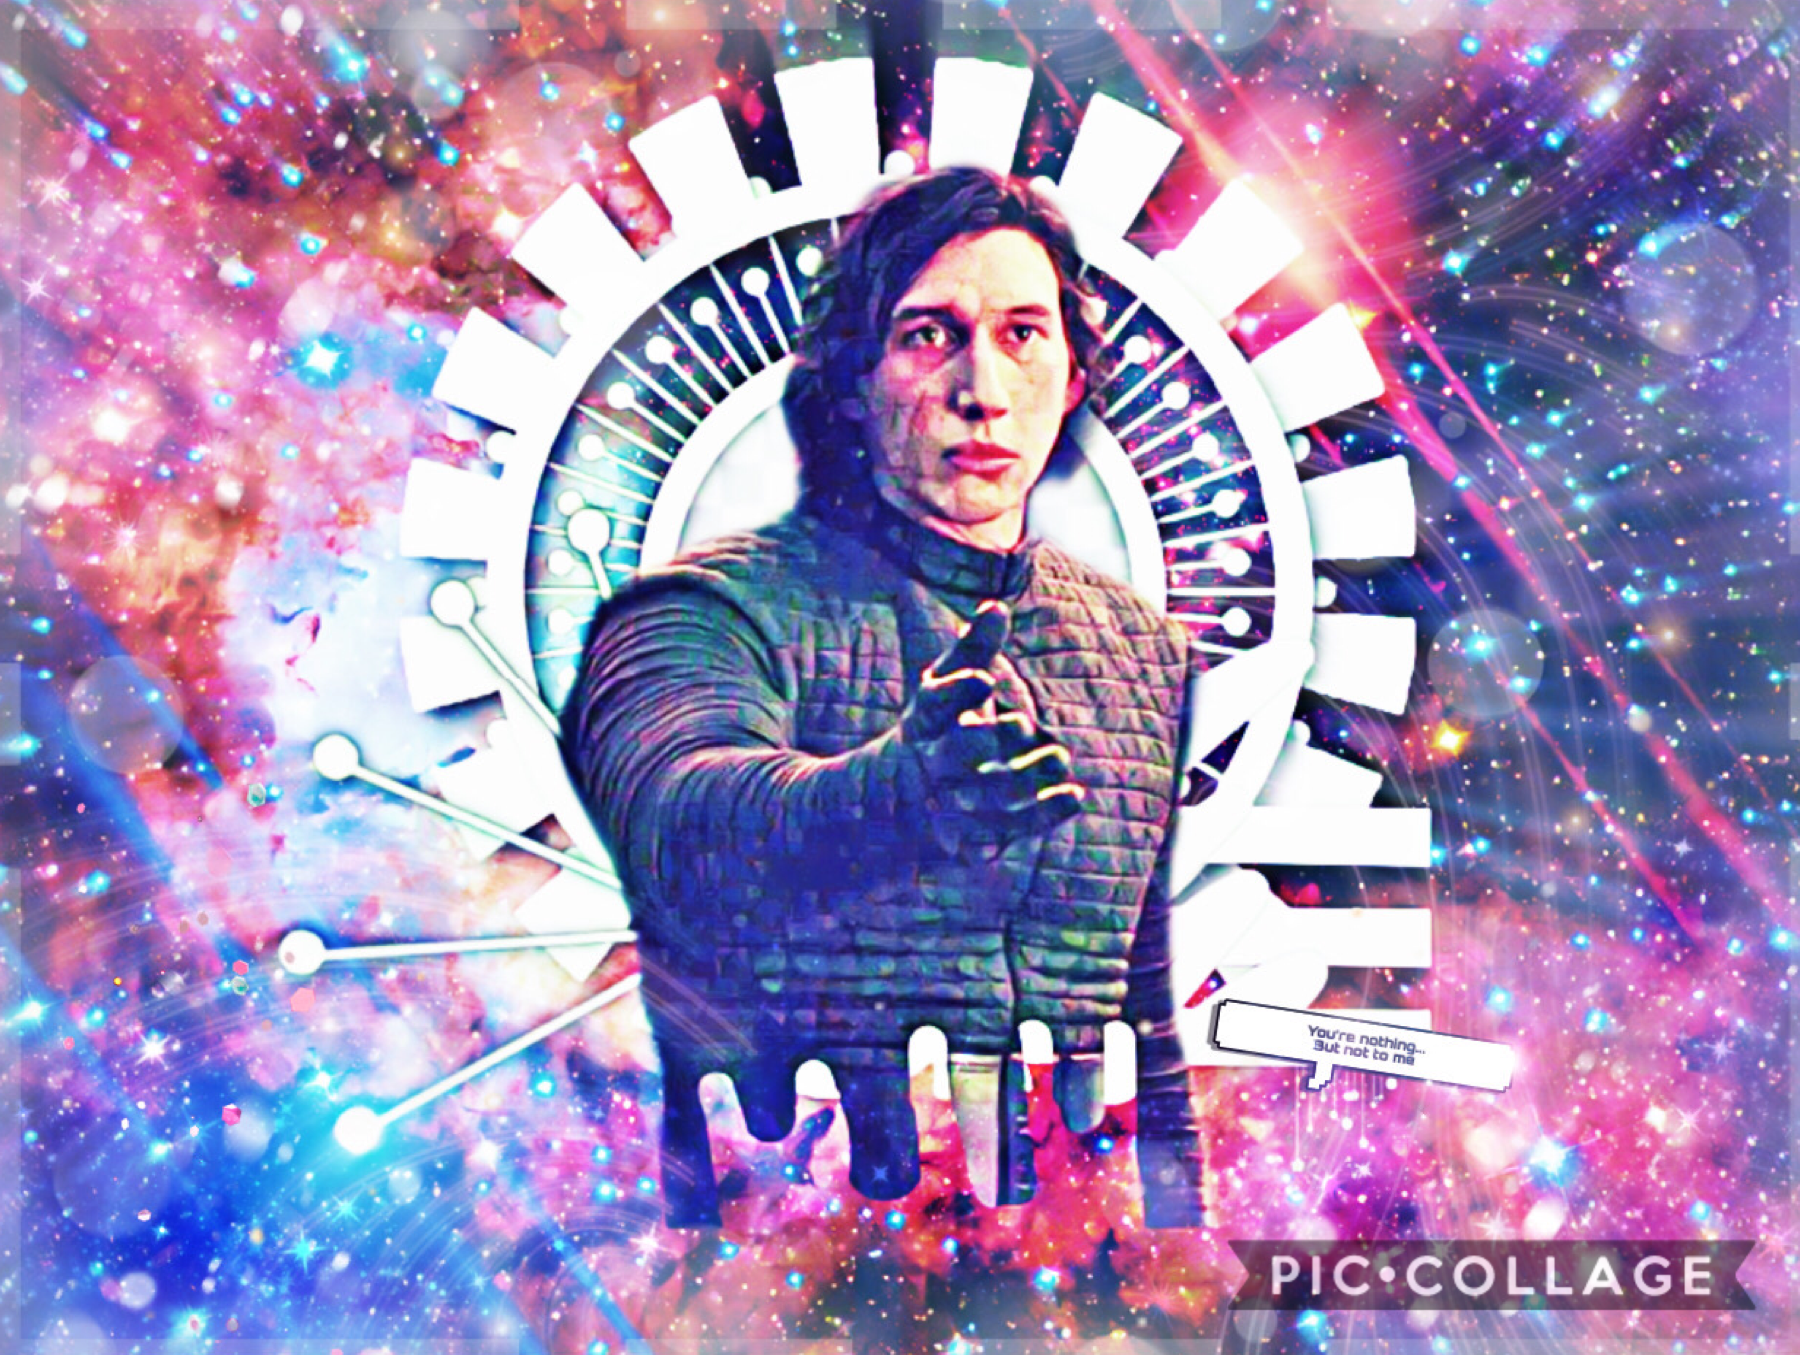 💜Made on PicsArt💜  Making a Ben Solo edit gave me the TROS feels again...Mando will keep me company until that wears off (if it does). PLEASE VOTE FOR A NEW USERNAME if you haven’t already! Time to embrace change?